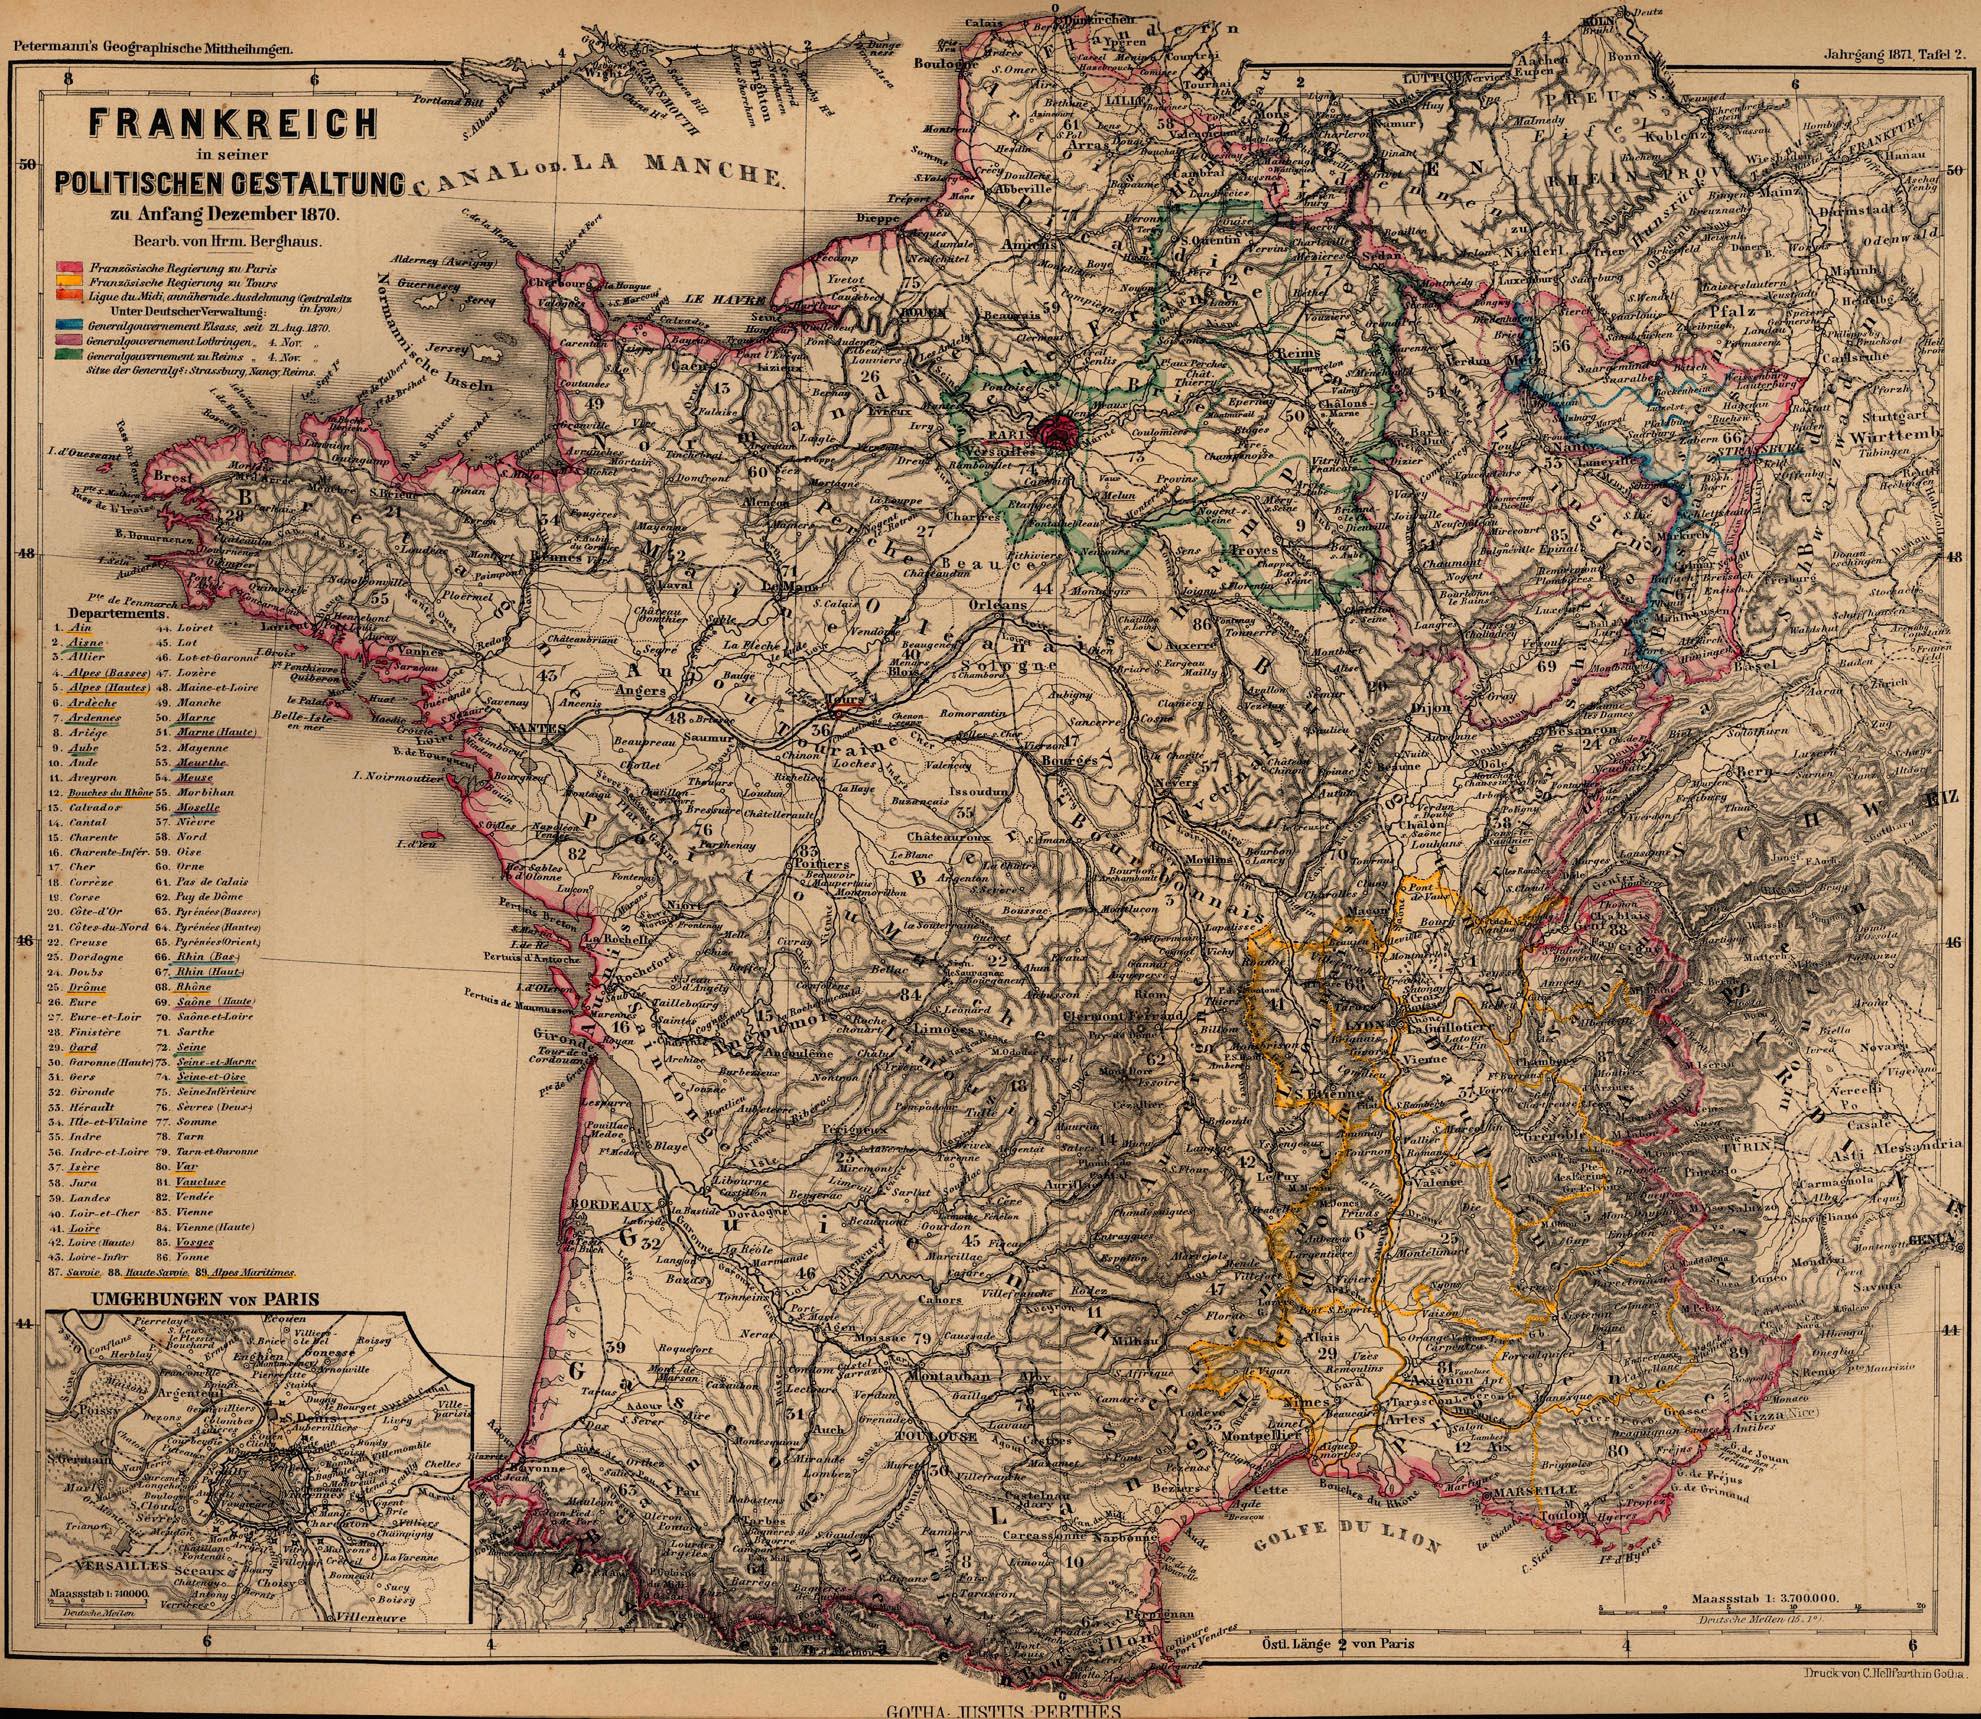 1870 Map of France